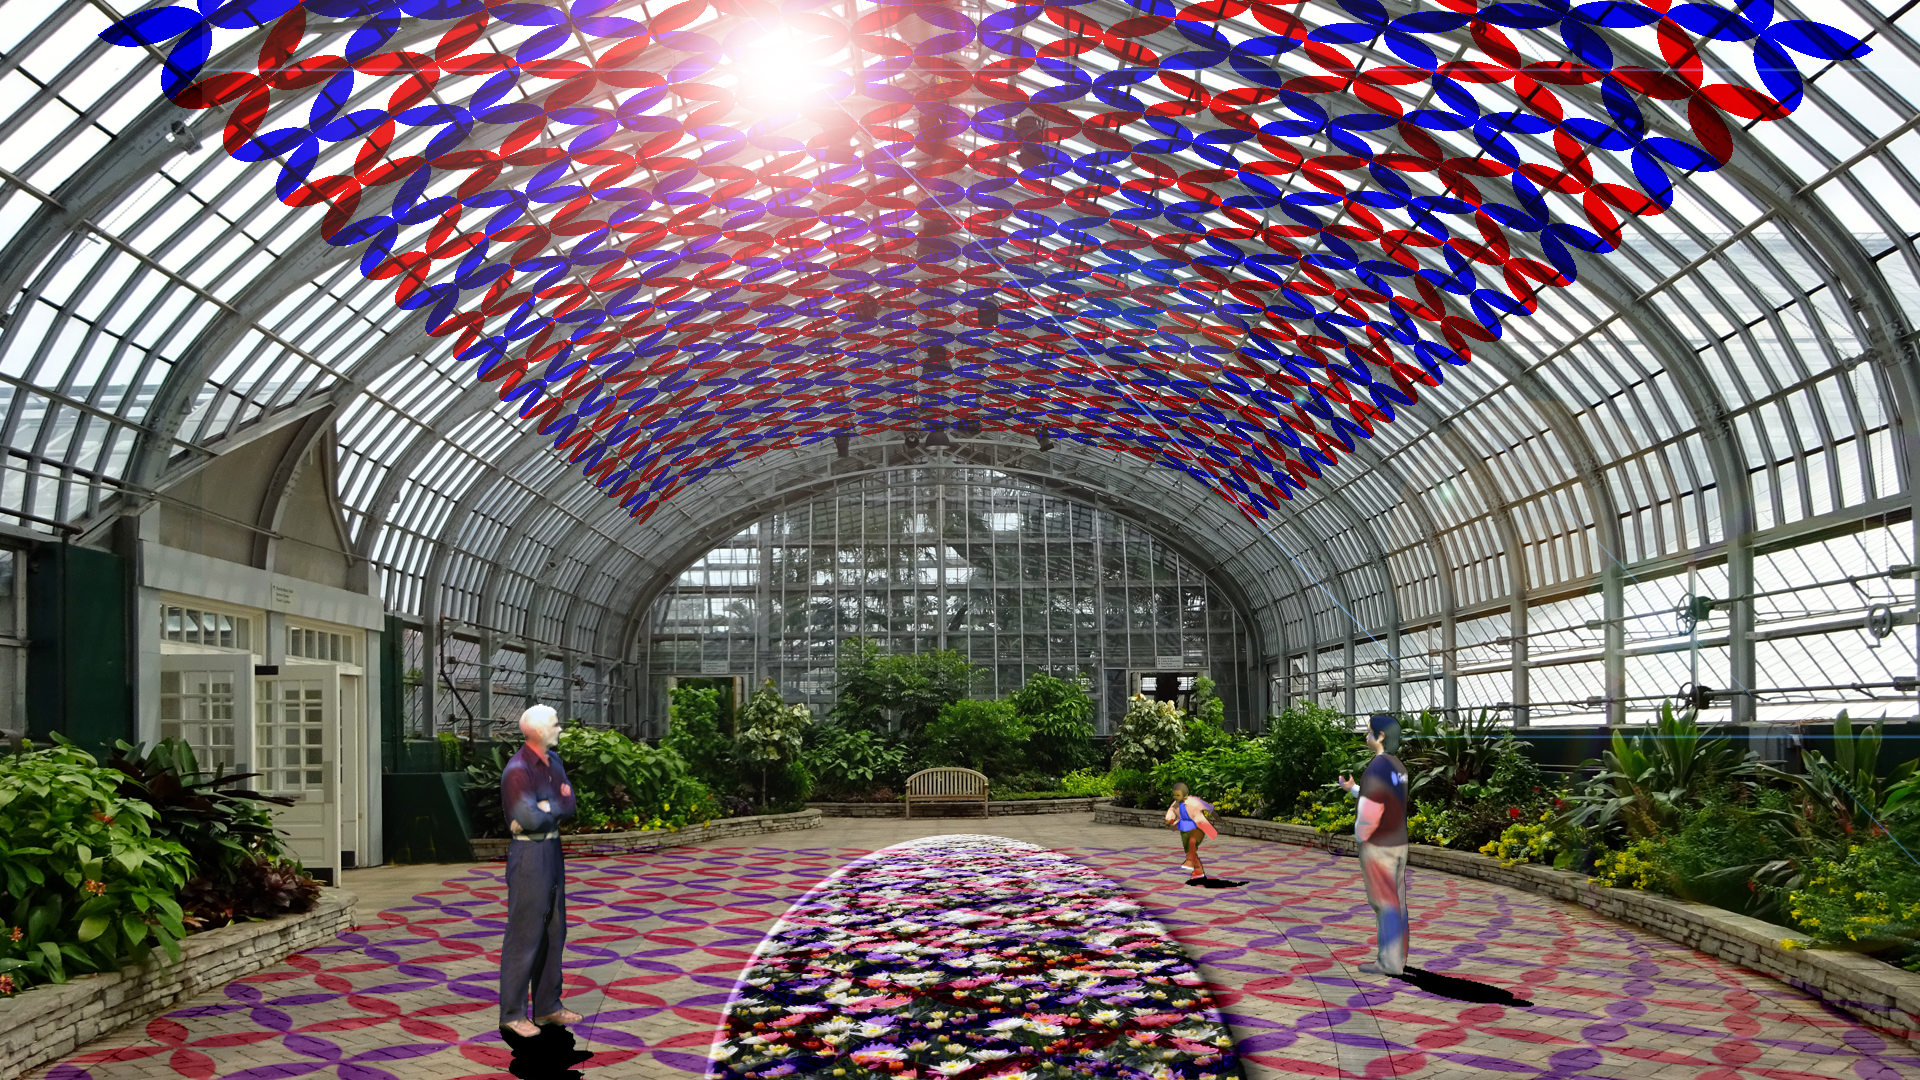 Florescence: A sculptural canopy of red and blue petals that will cast colorful shadows throughout the Show House by day and by night. The Show House color panel installation will reveal the spectrum of light necessary for plant growth.